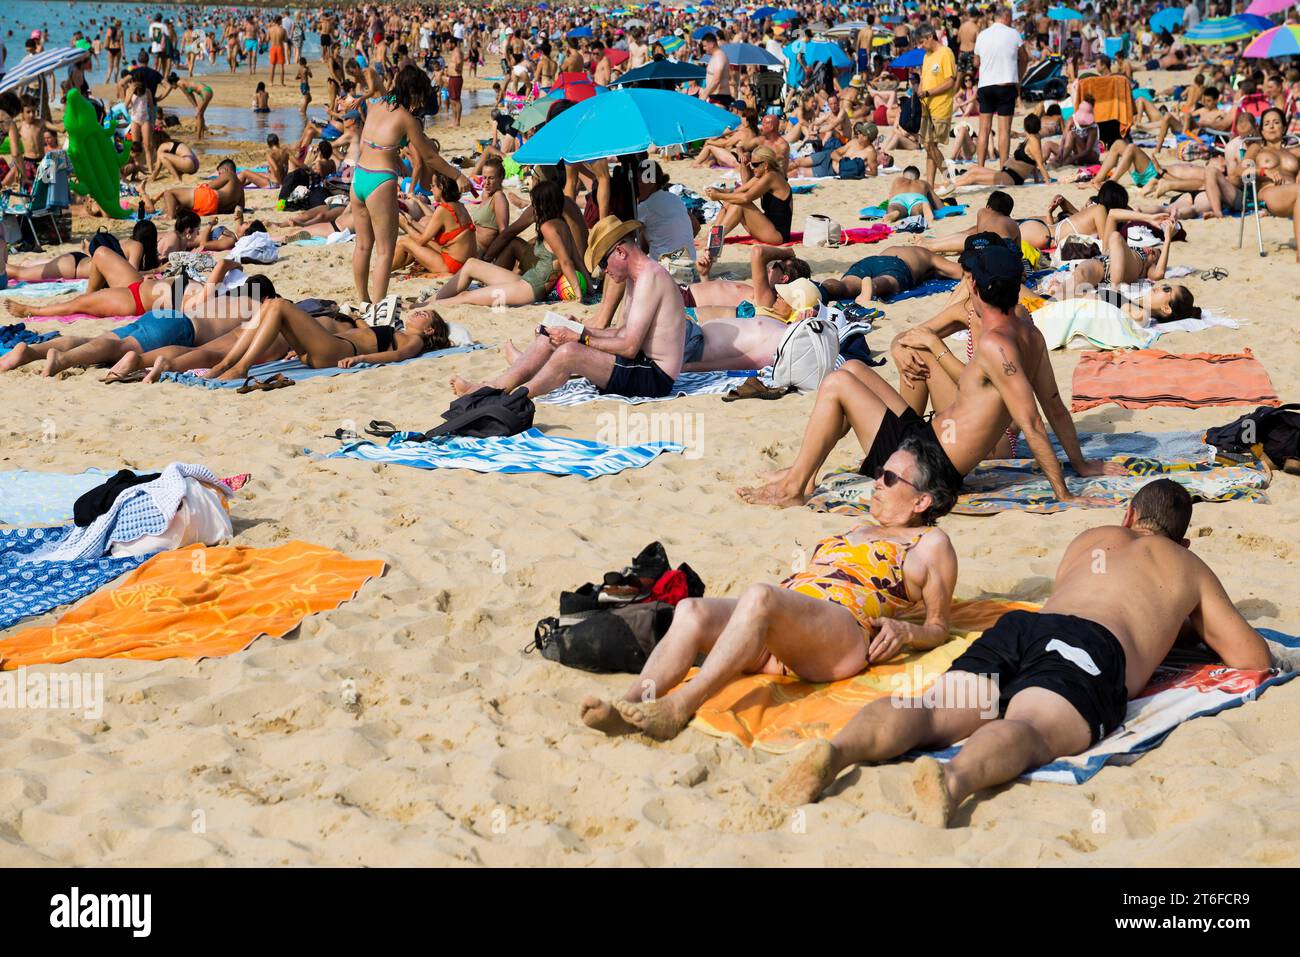 Crowded beach with people in August, San Sebastian, Donostia, Basque Country, Northern Spain, Spain Stock Photo